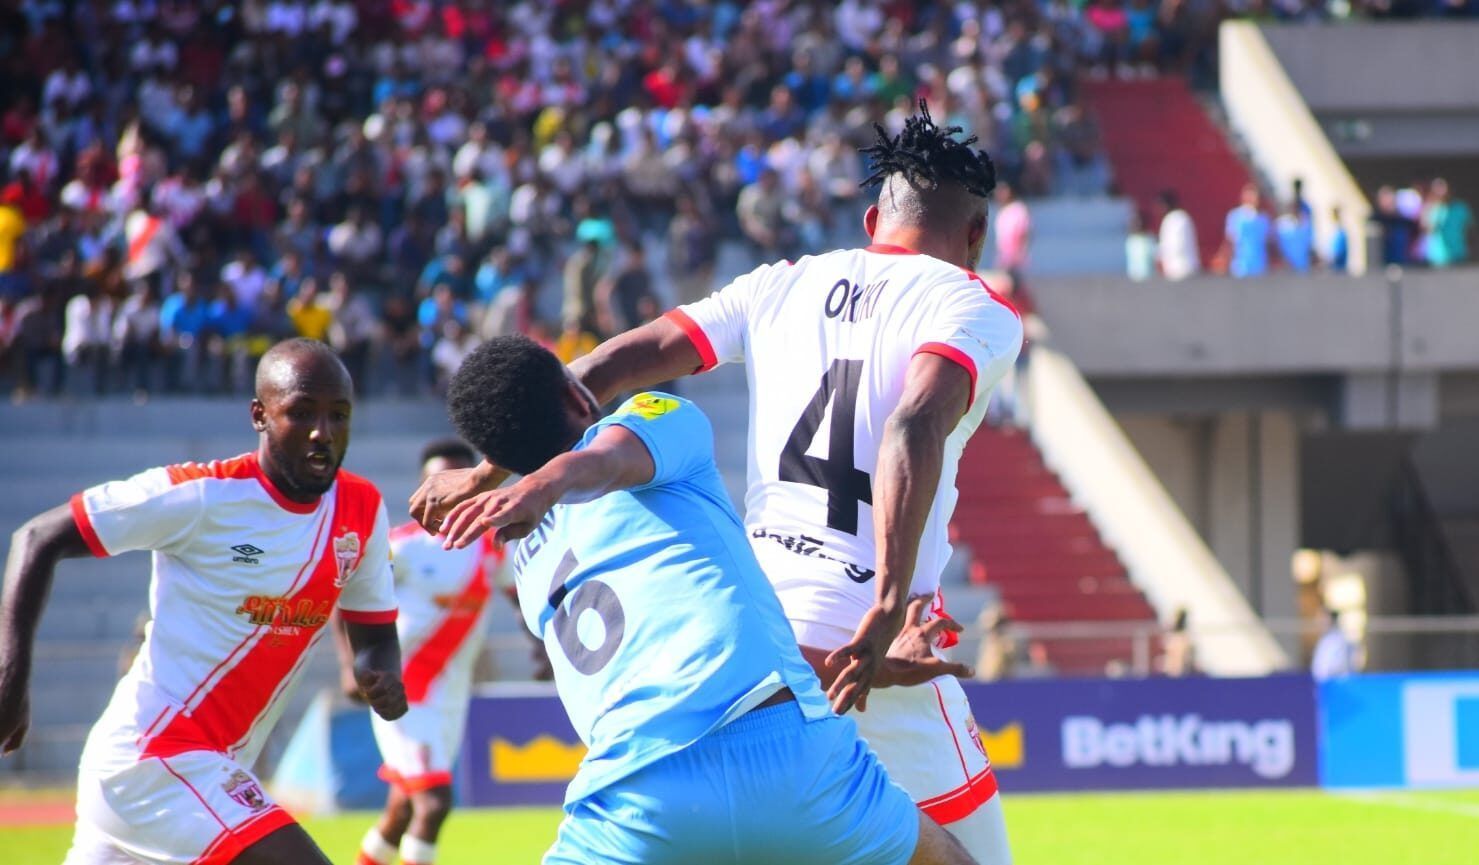 St George vs Dire Dawa Prediction, Betting Tips & Odds │01 MARCH, 2023